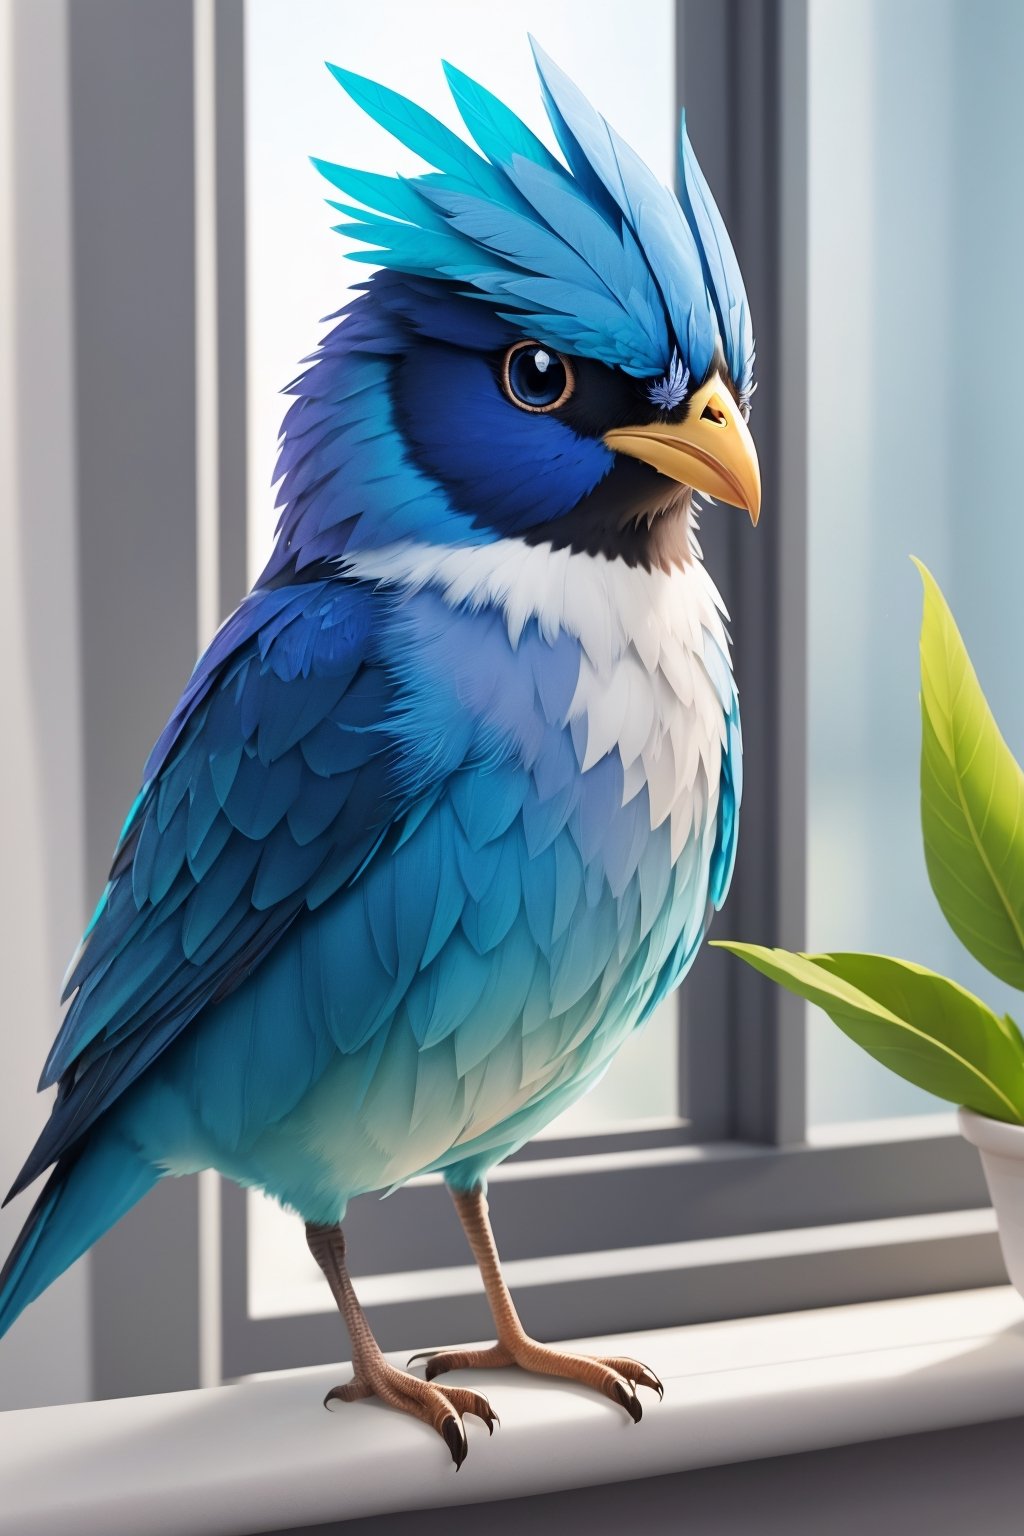 (best quality, hyper-realistic, 8K, ultra HD), (Pixar style, Disney style, Cinema 4D), Create a stunning 8K ultra HD illustration that brings Benny, a small bird with bright blue feathers and a melodious voice, to life. Render Benny in a hyper-realistic style, paying homage to both Pixar and Disney's iconic animation styles, using the power of Cinema 4D to capture every intricate detail of this charming character perched gracefully on a windowsill.